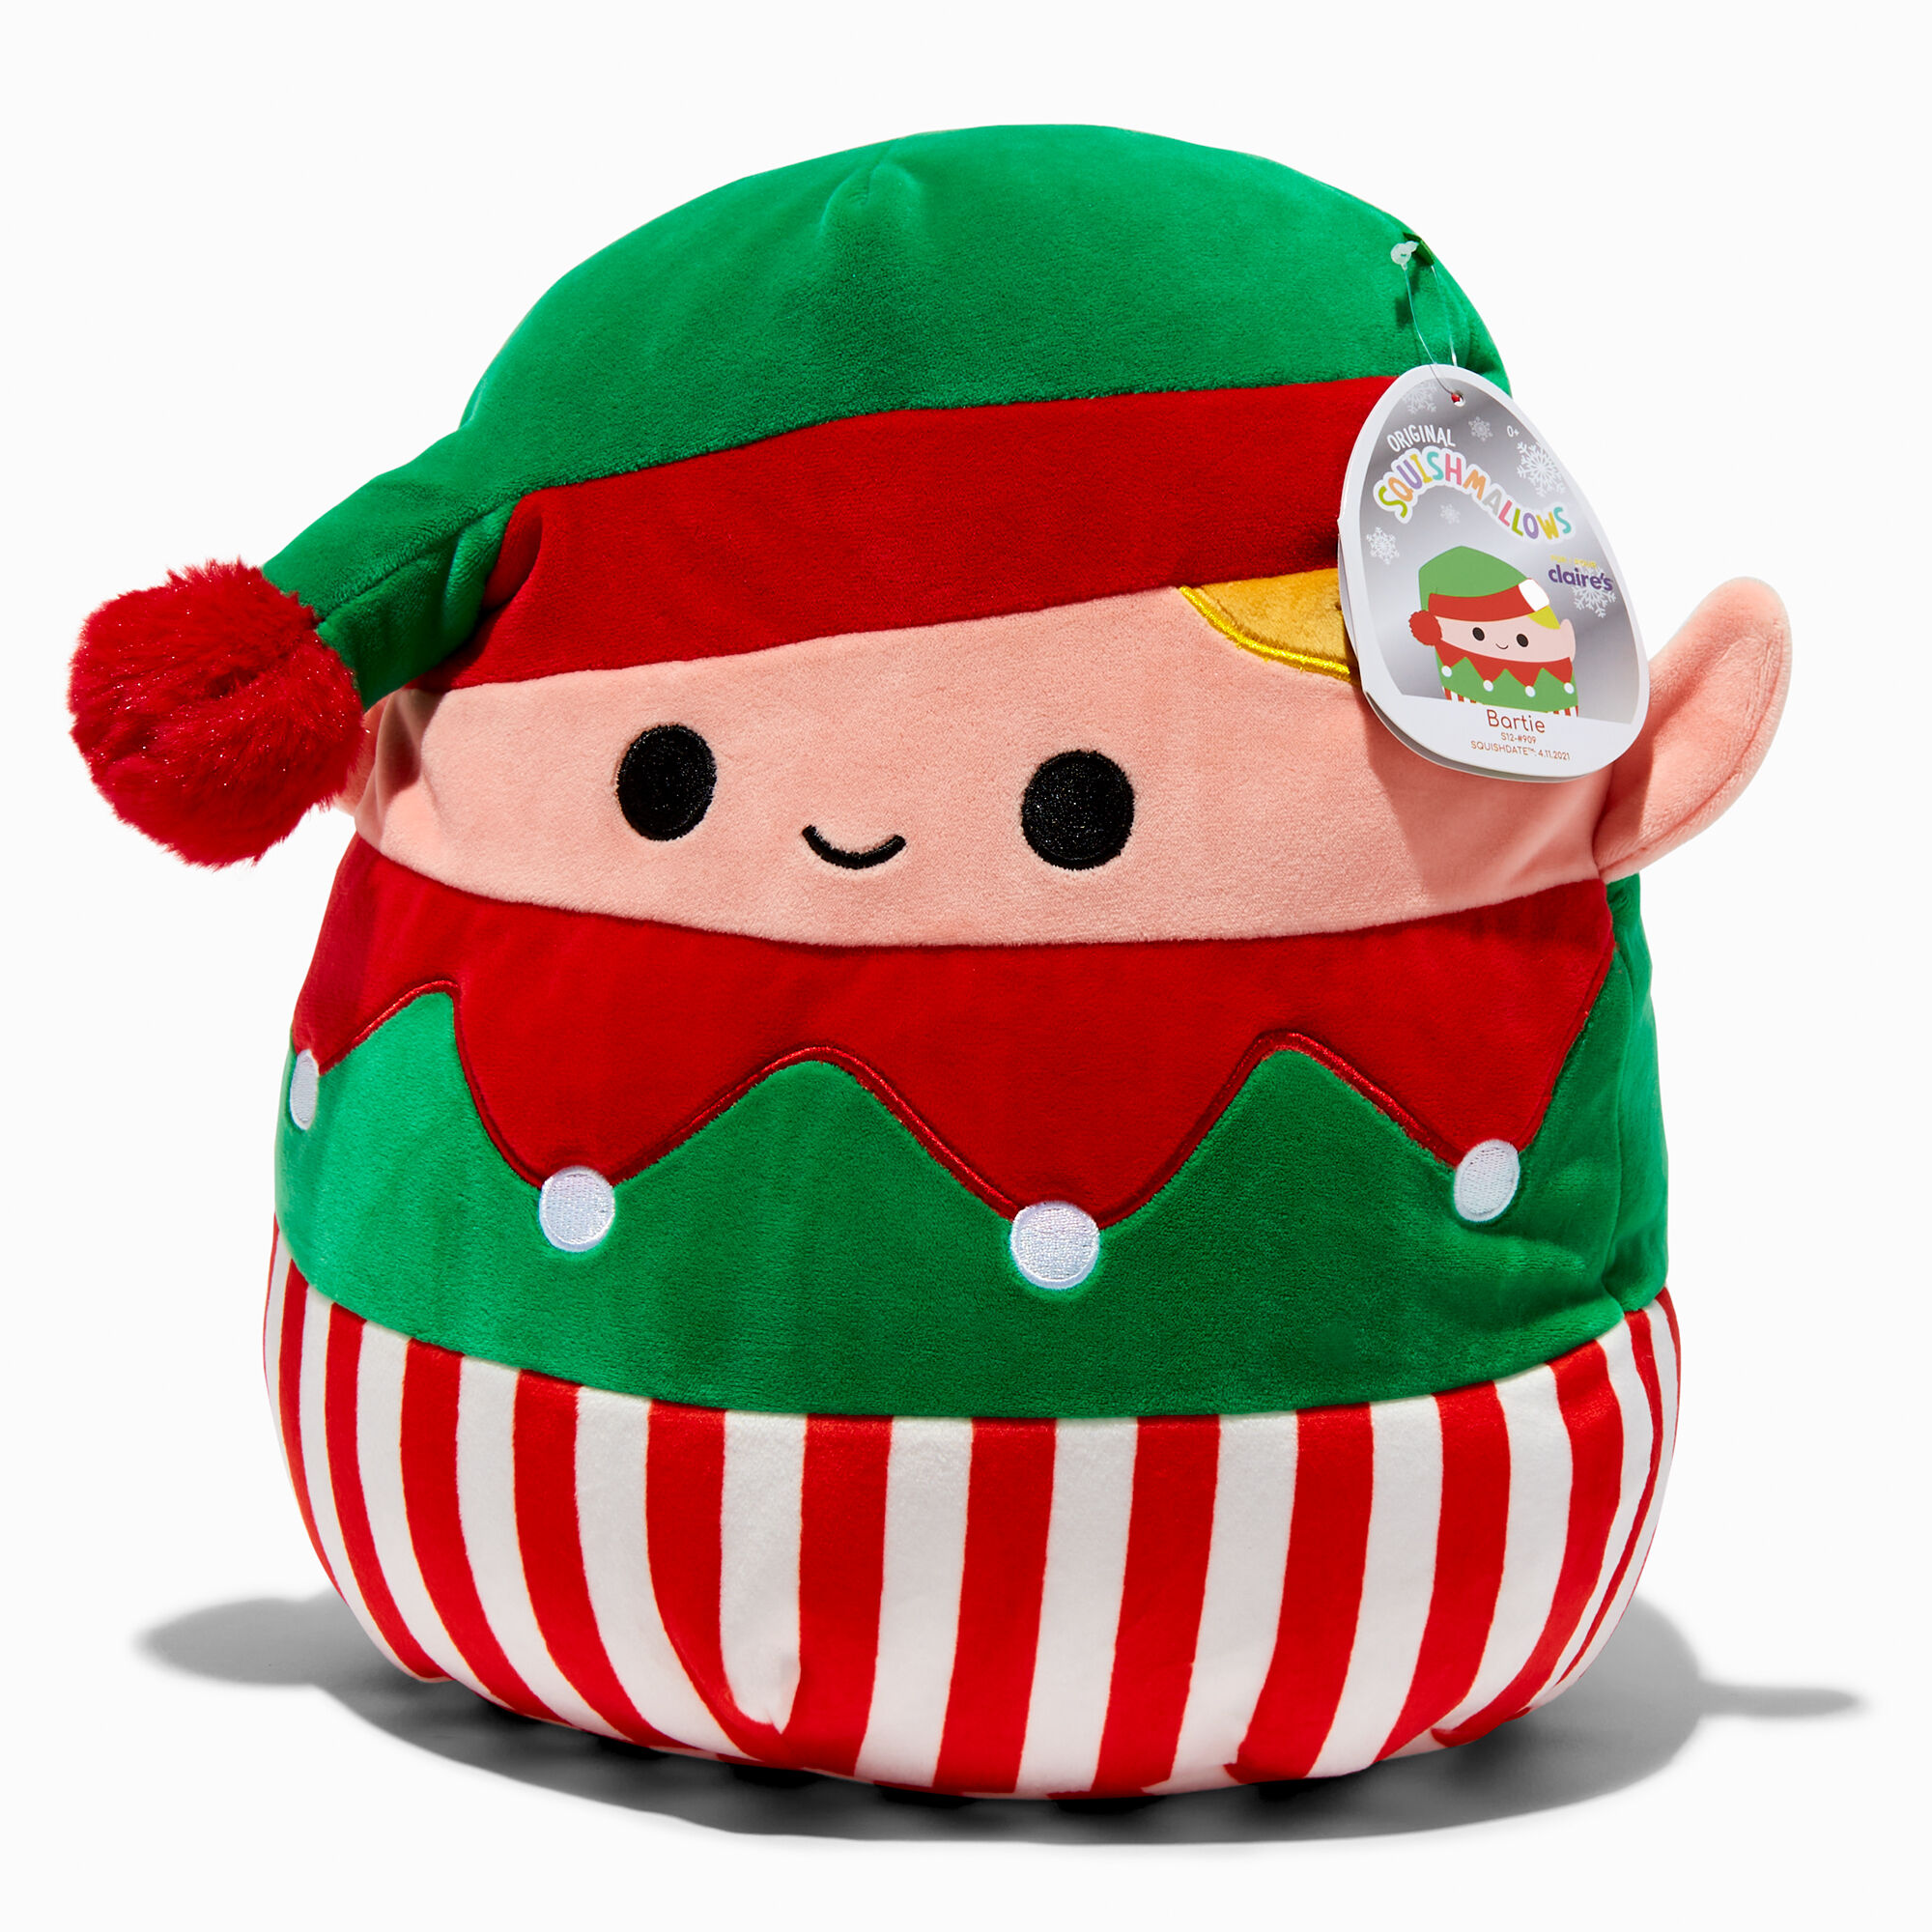 View Squishmallows Claires Exclusive Bartie The Elf Plush Toy information